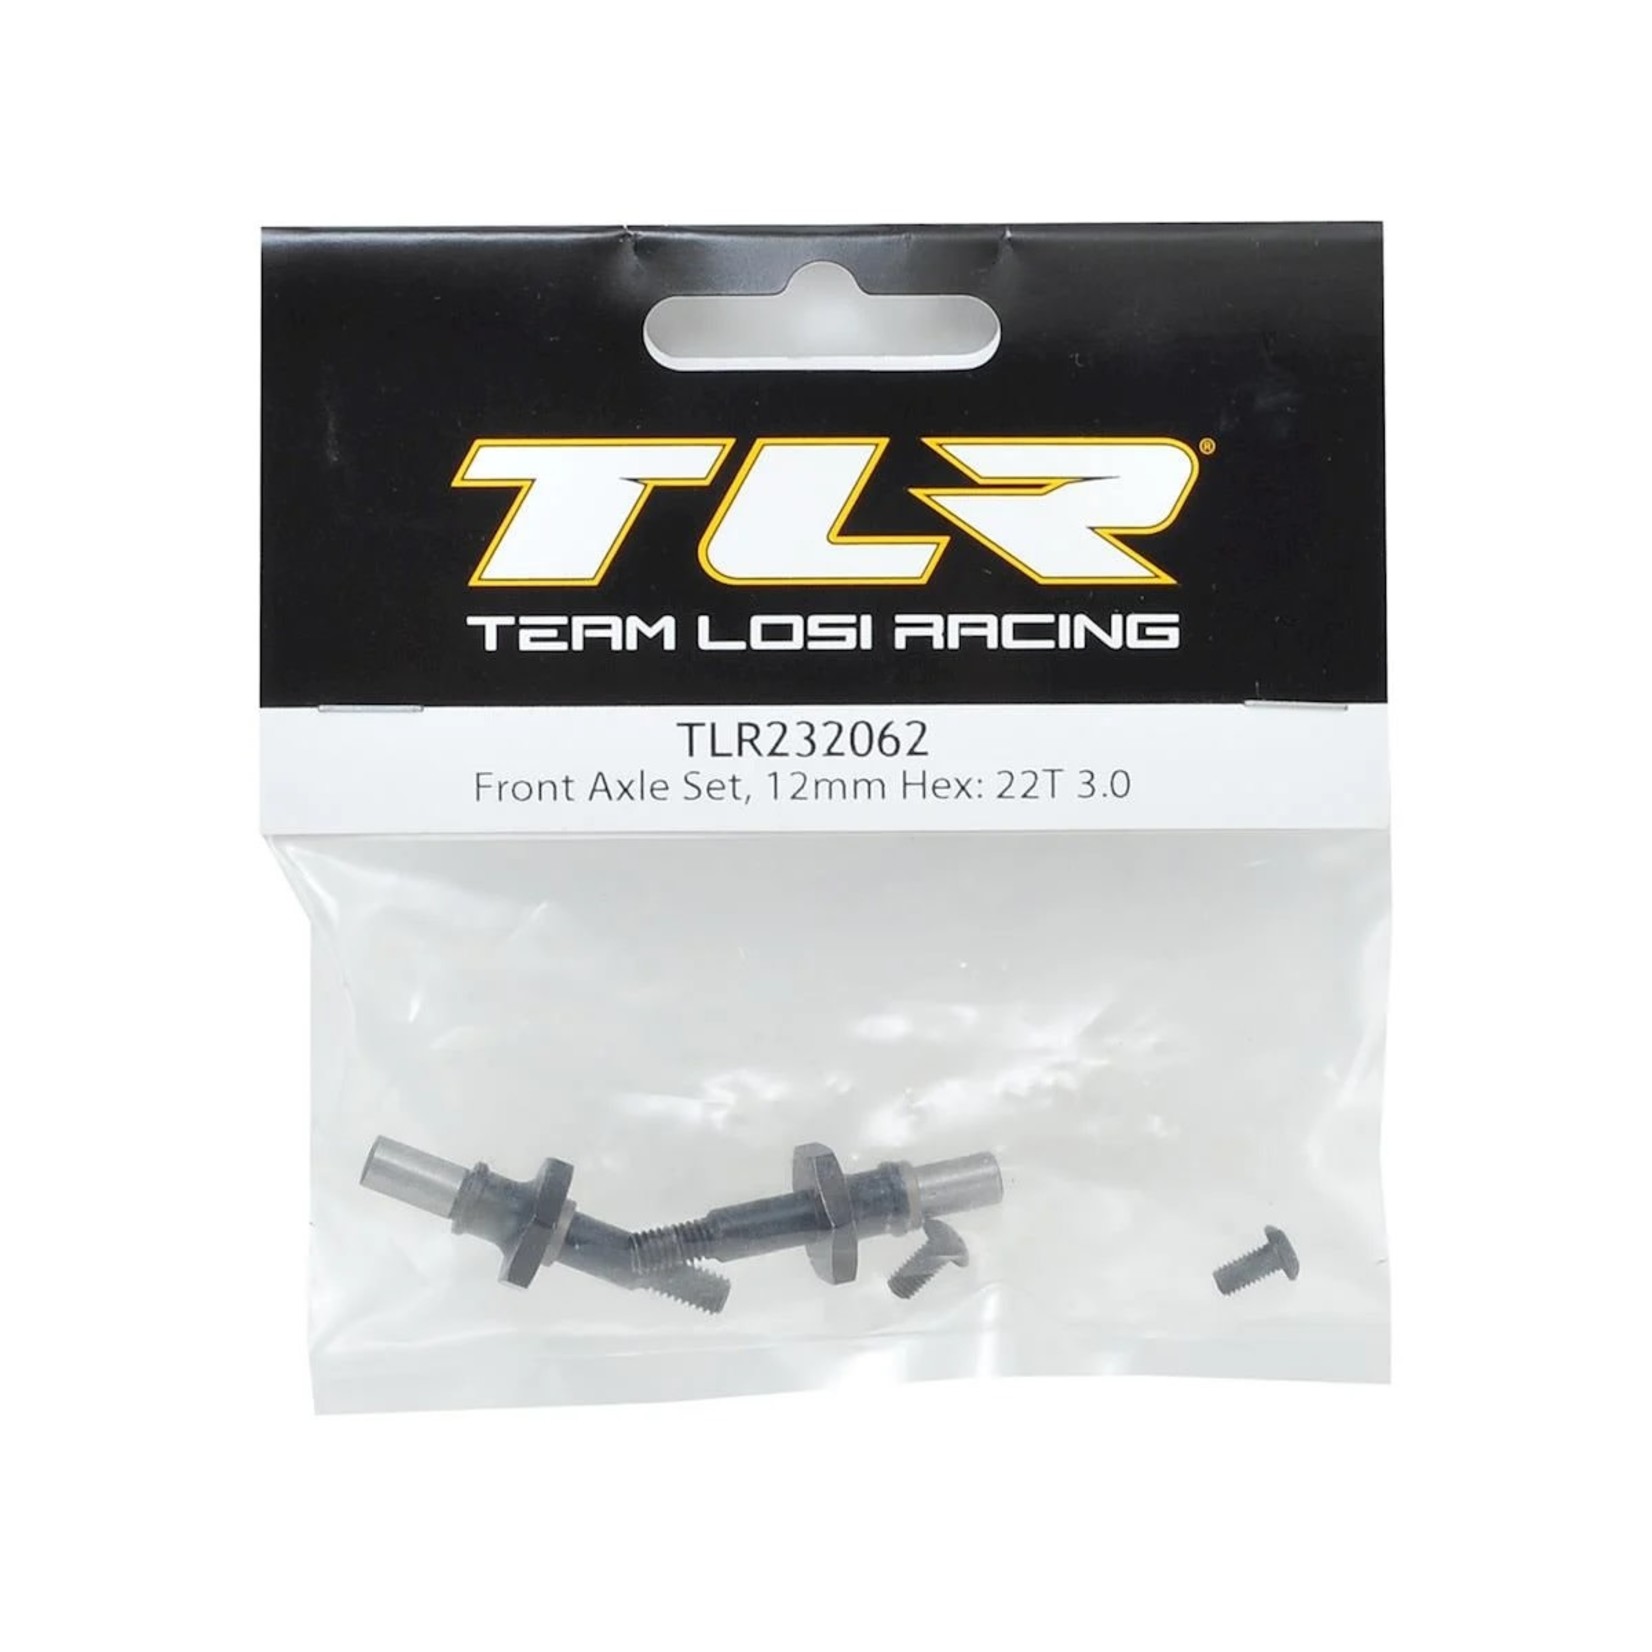 TLR Team Losi Racing 12mm Hex 22T/22SCT 3.0 Front Axle Set #TLR232062